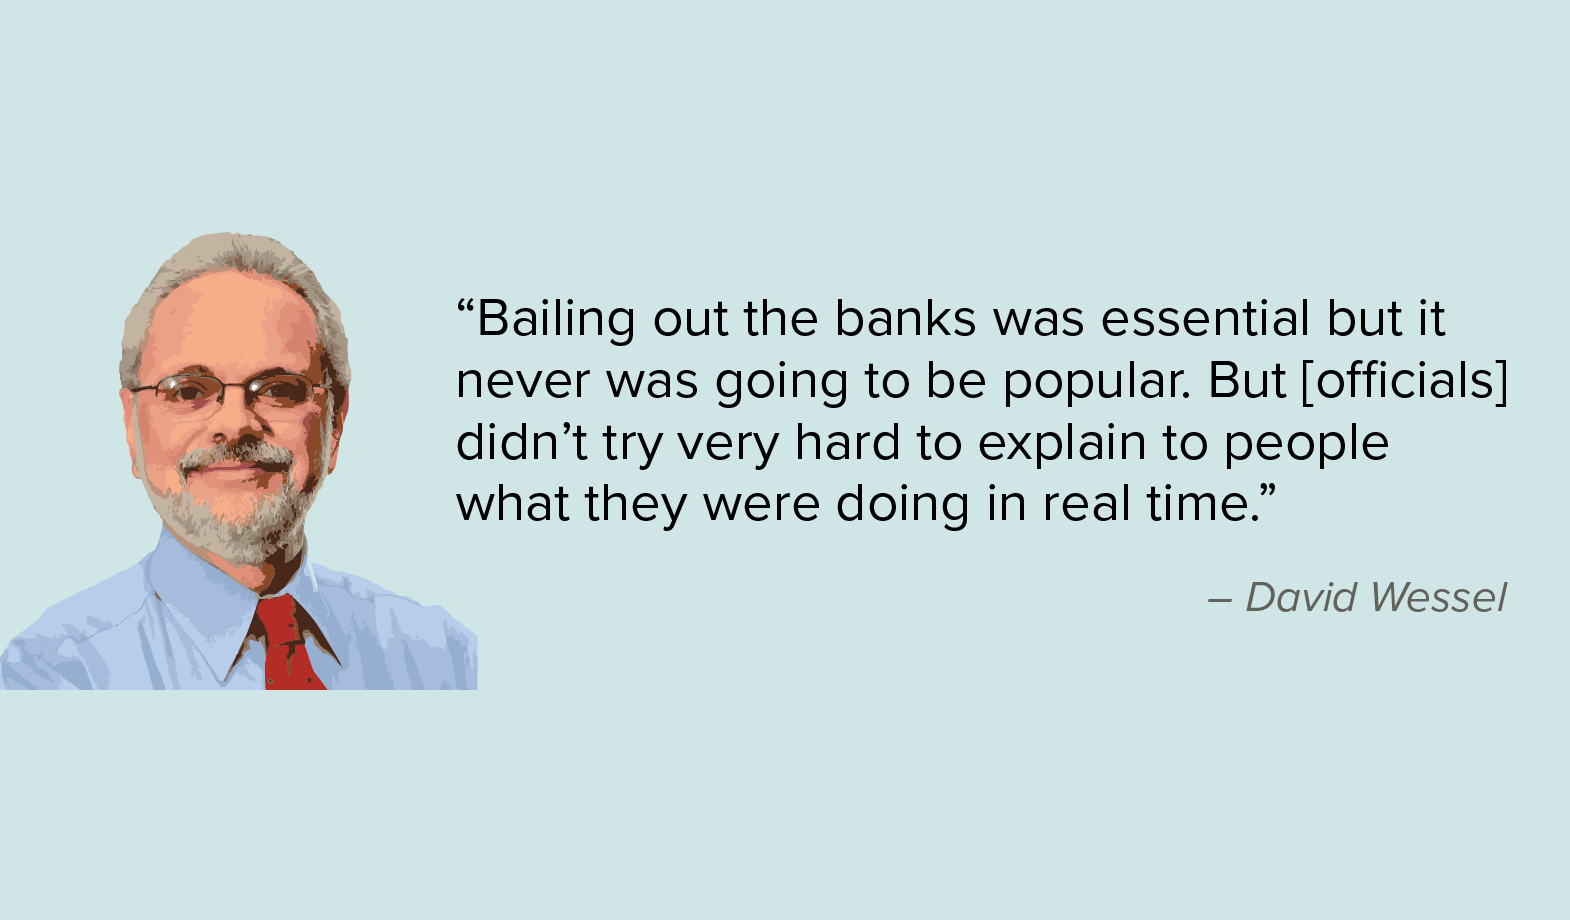 David Wessel: “Bailing out the banks was essential but it never was going to be popular.” 